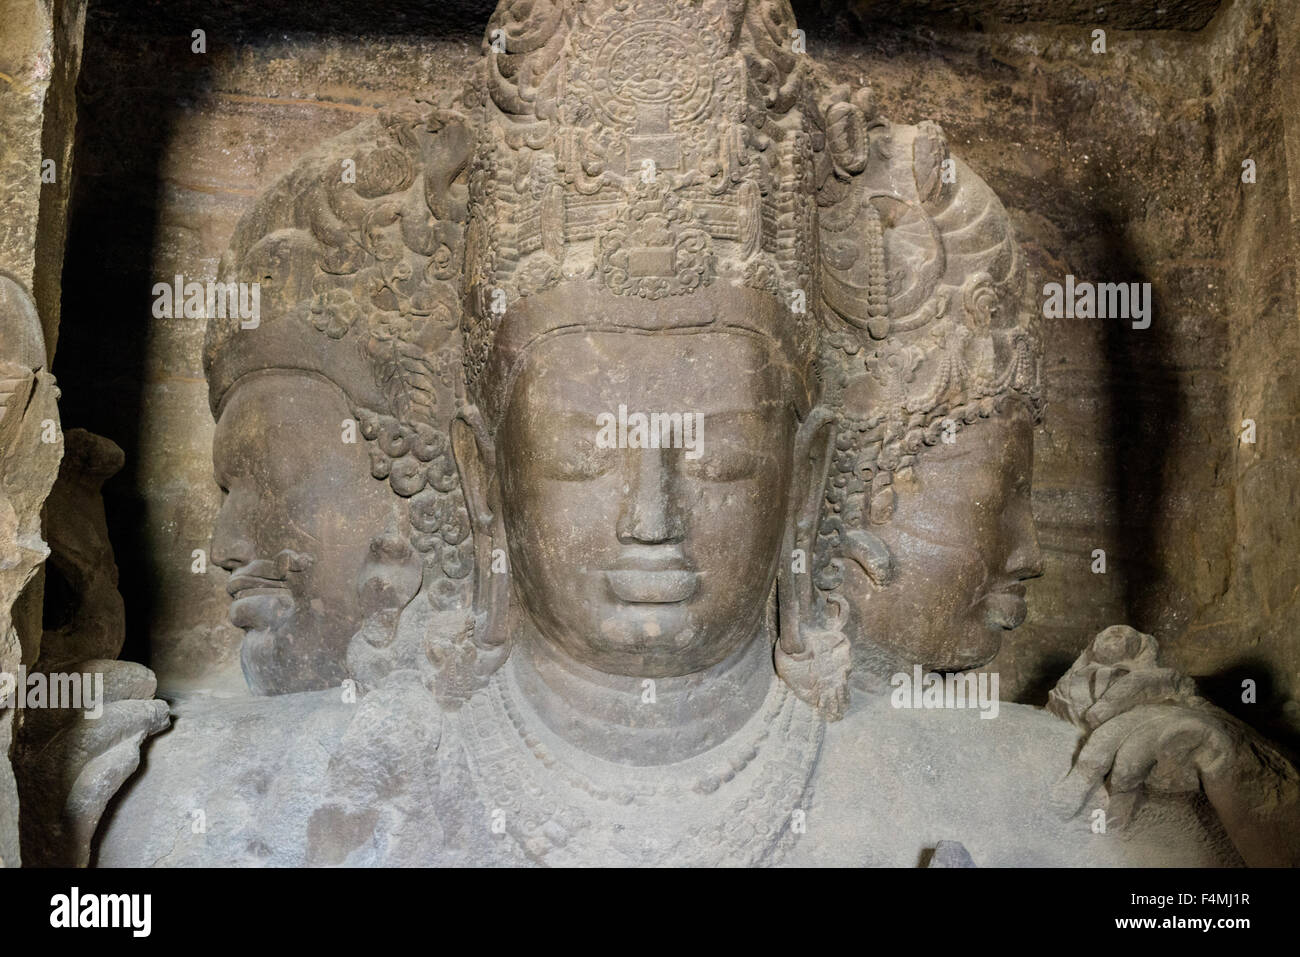 The 3 faces of Shiva inside the main cave on Elephanta Island, carved out of solid rocks Stock Photo